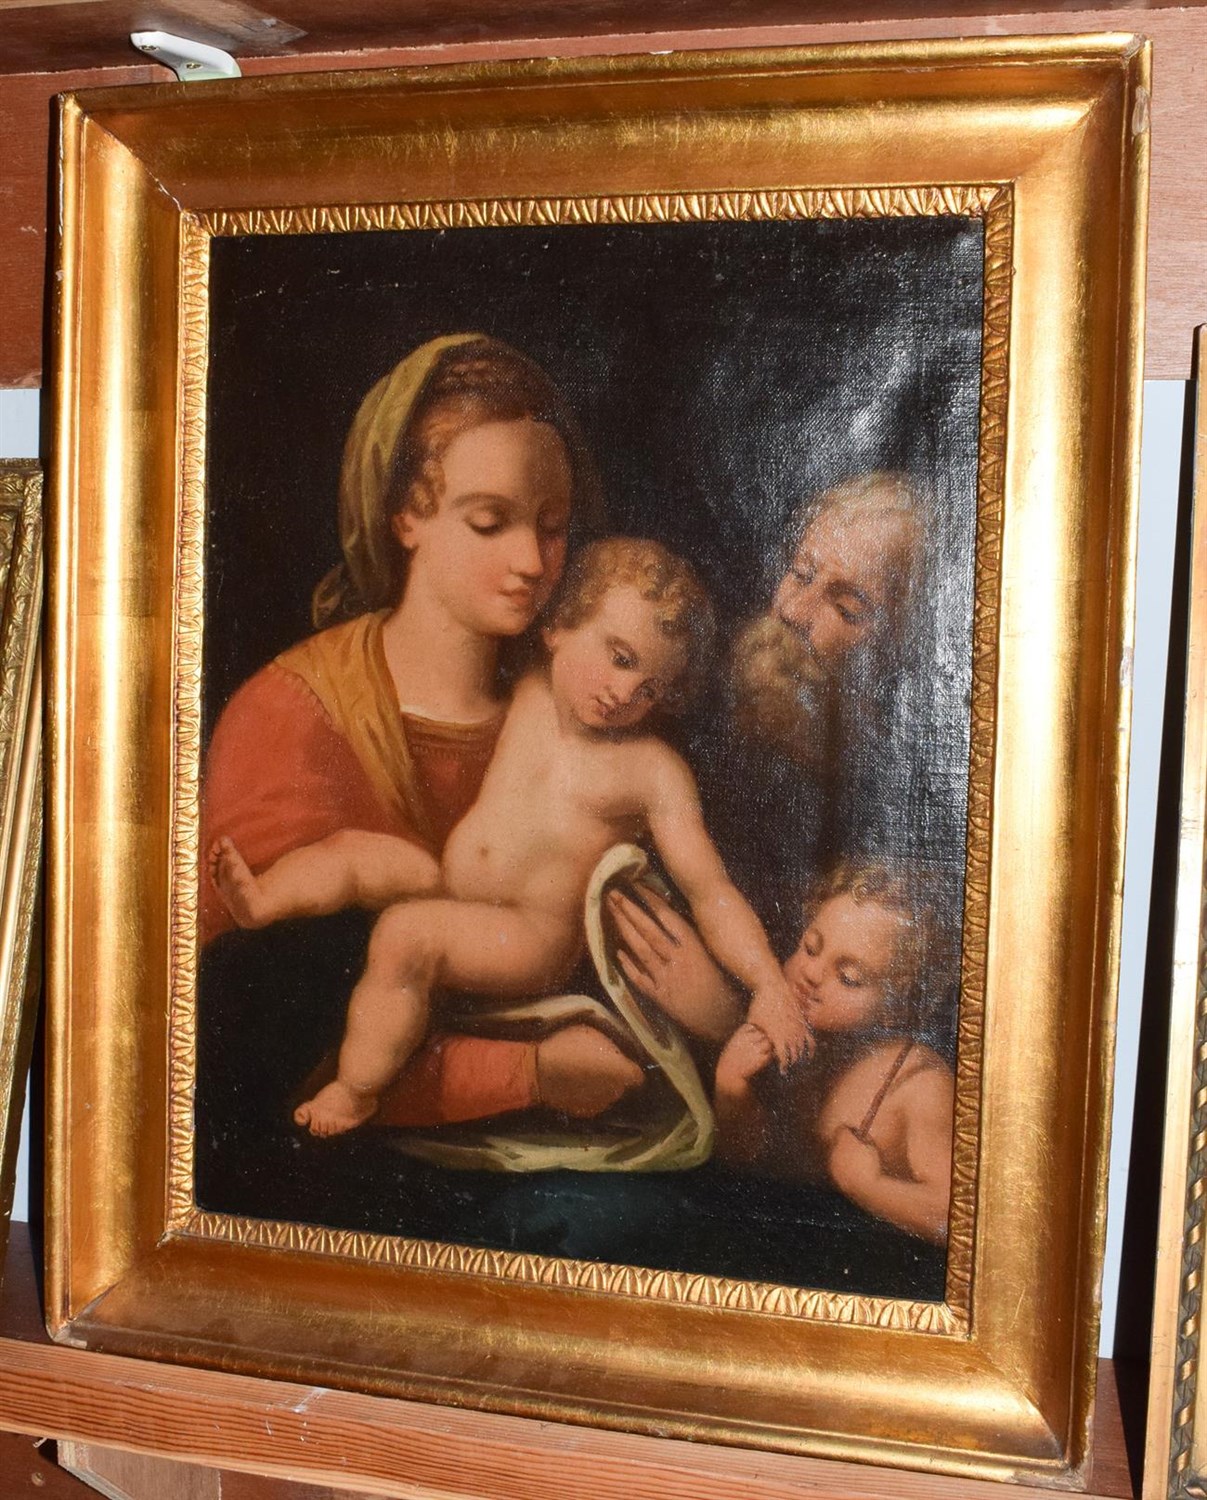 Lot 1030 - After Raphael, Holy family with St John, oil on canvas, 45cm by 35cm